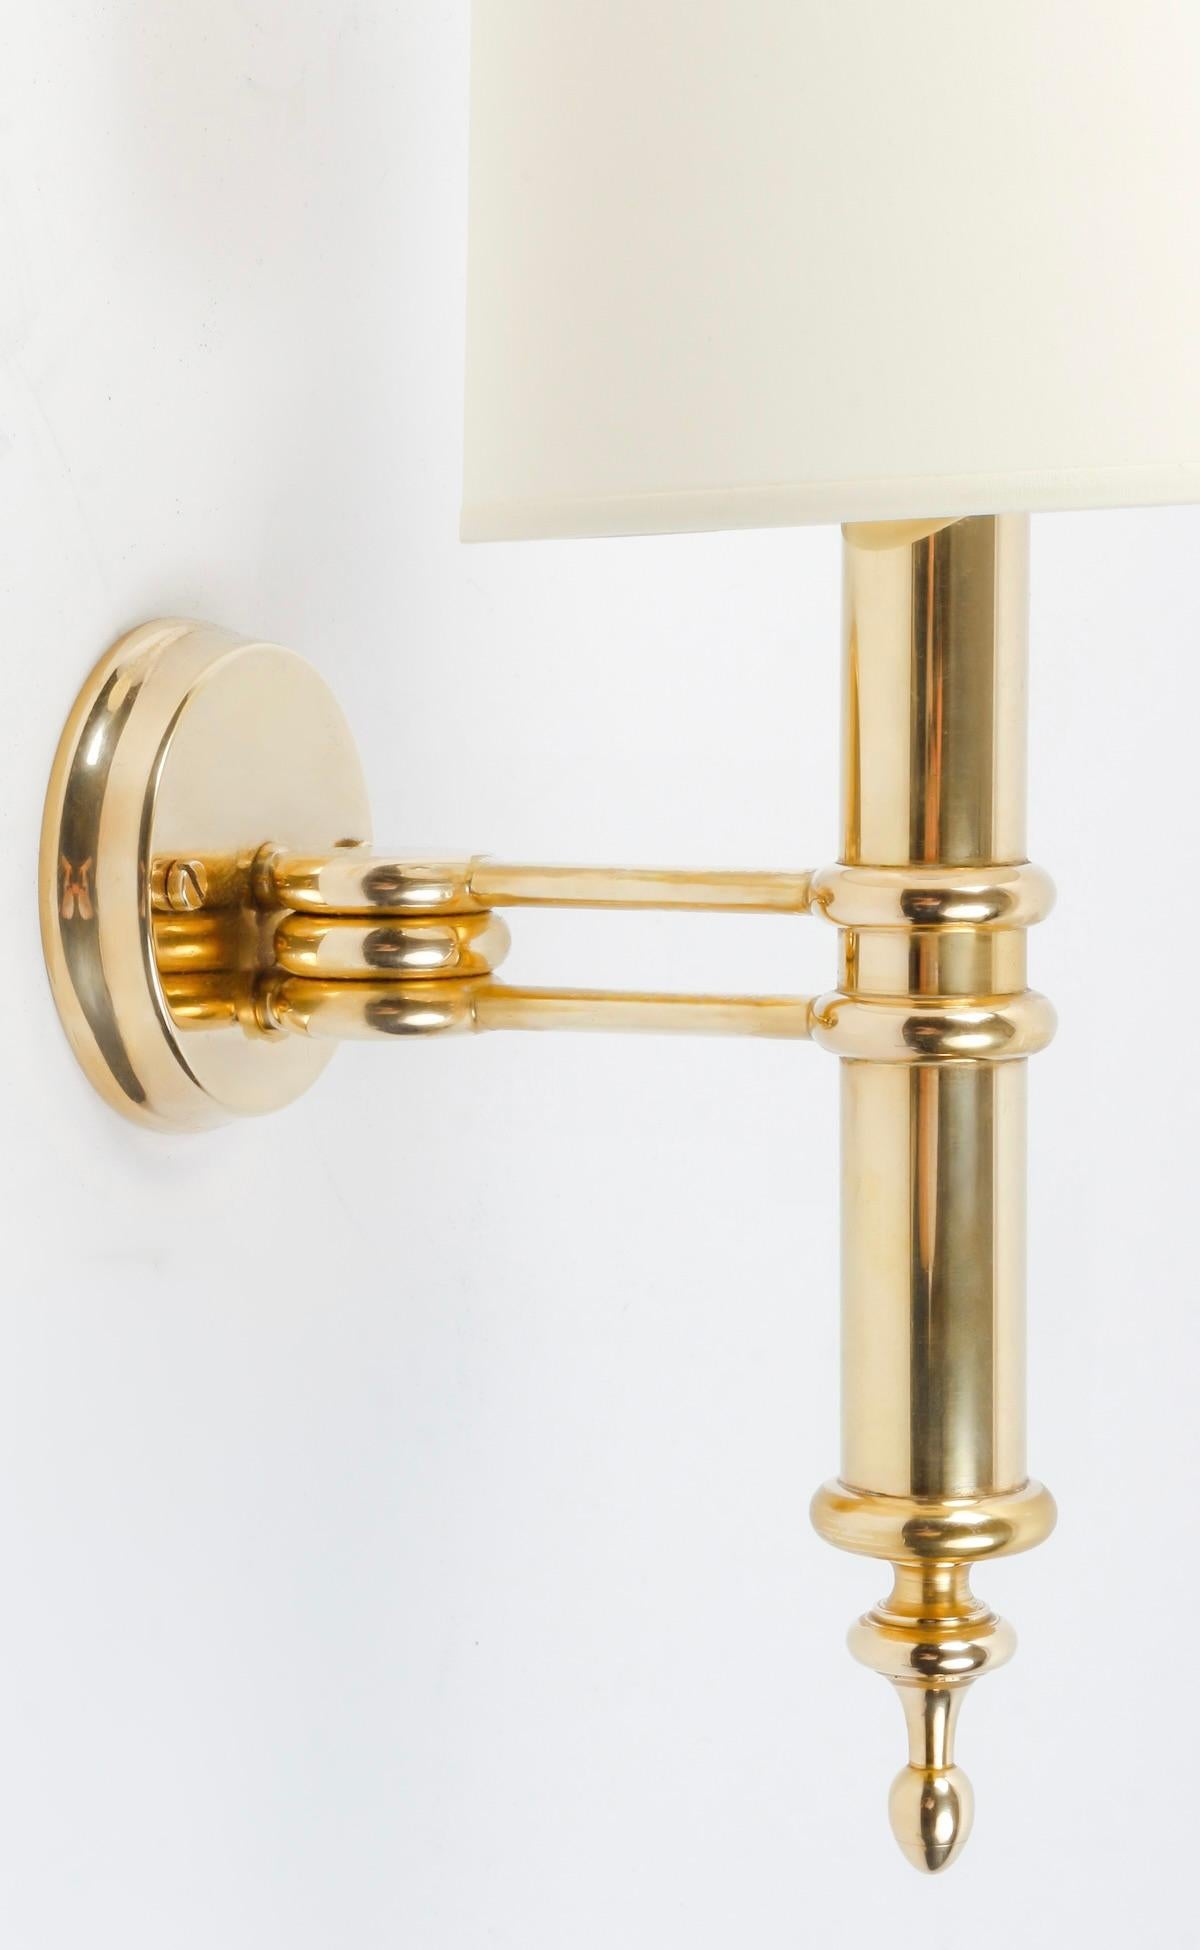 Composed of a gilded bronze wall bracket on which rests an arm composed of two rods supporting the cylindrical-shaped light arm embellished on the lower part with an oval point.
On the upper part, an off-white, trapezoid-shaped cotton lampshade